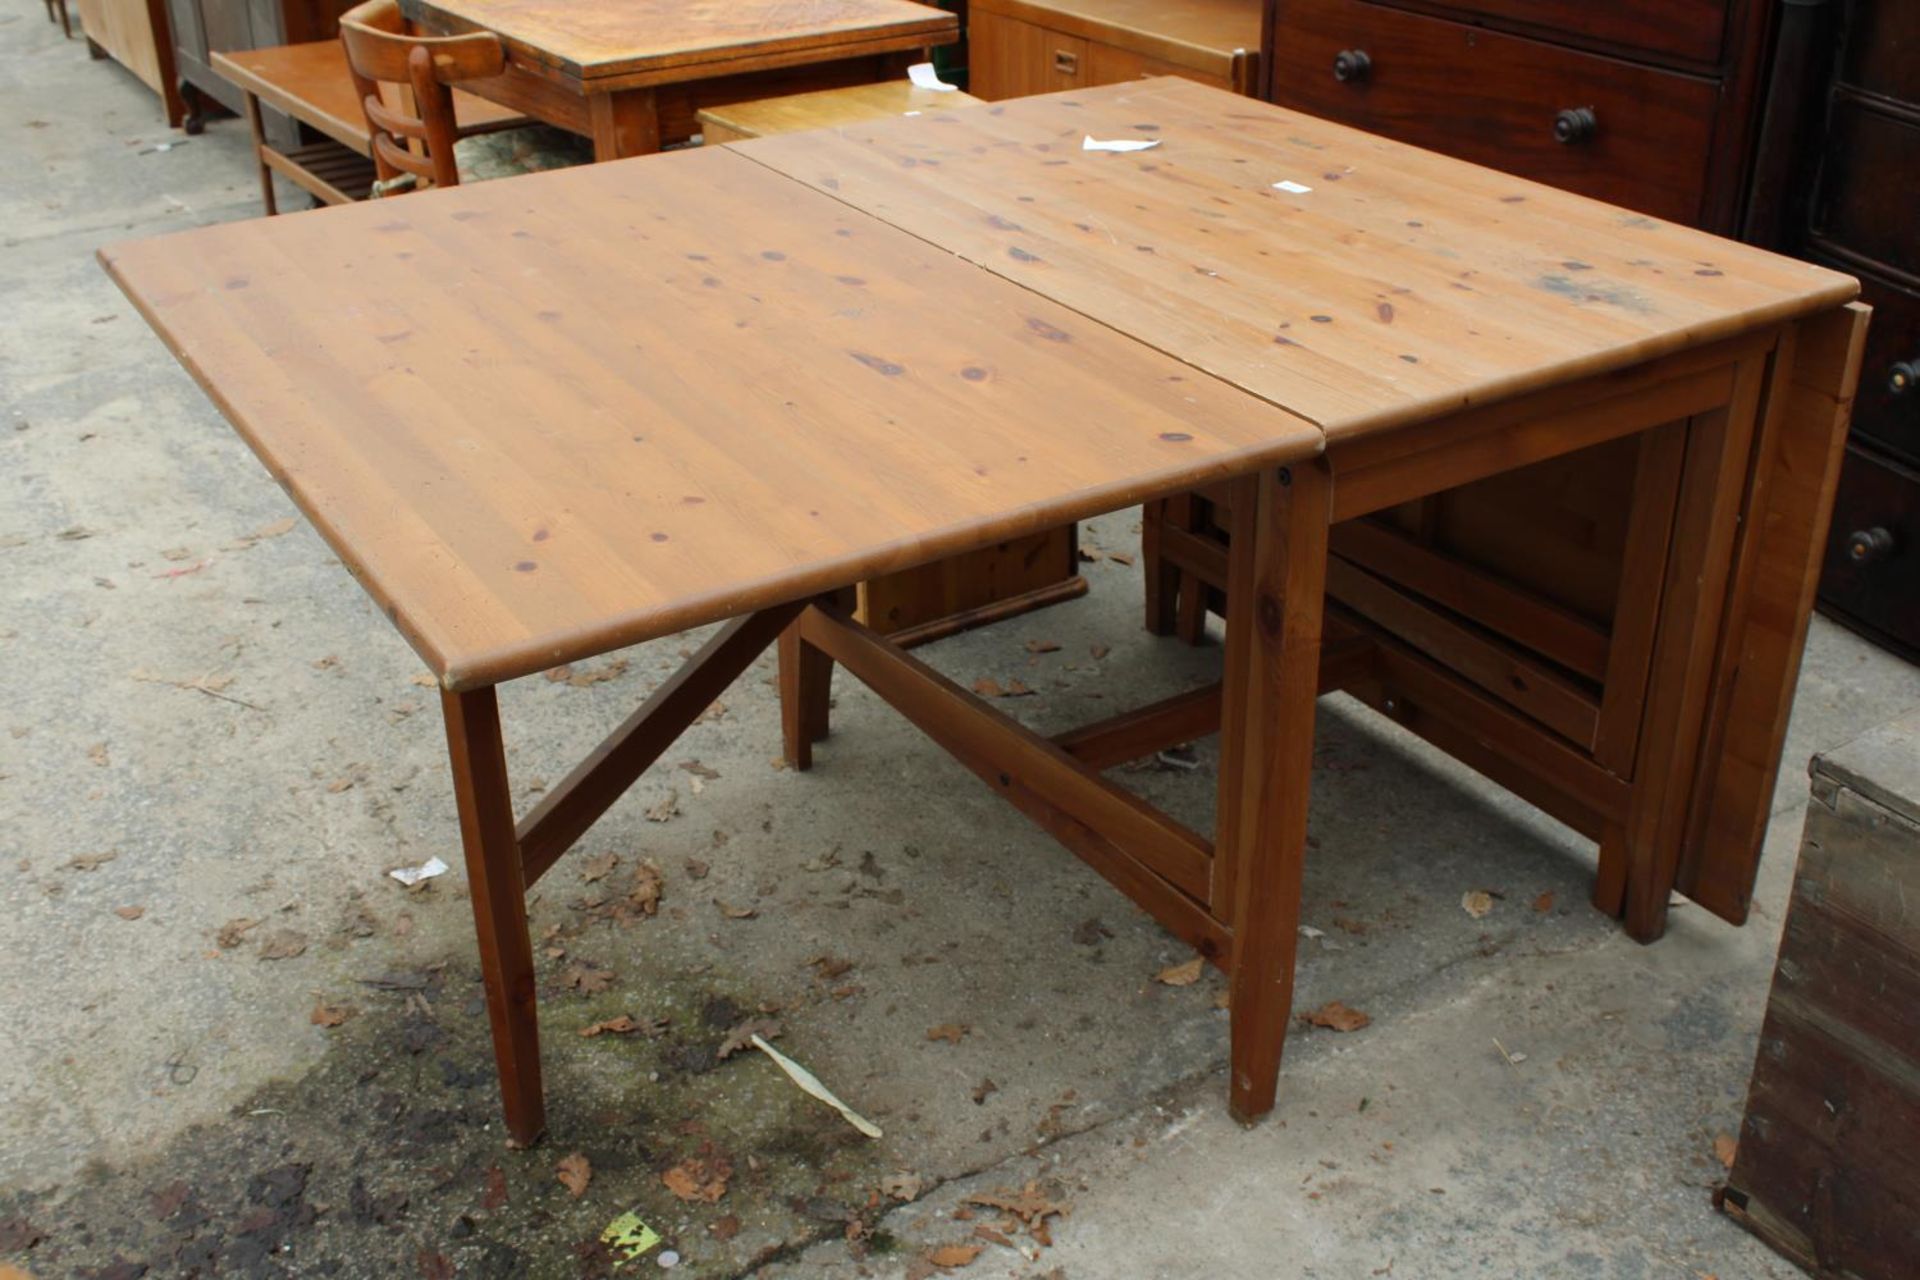 A MODERN PINE GATE-LEG DINING TABLE, 79.5" X 41" OPENED - Image 2 of 4